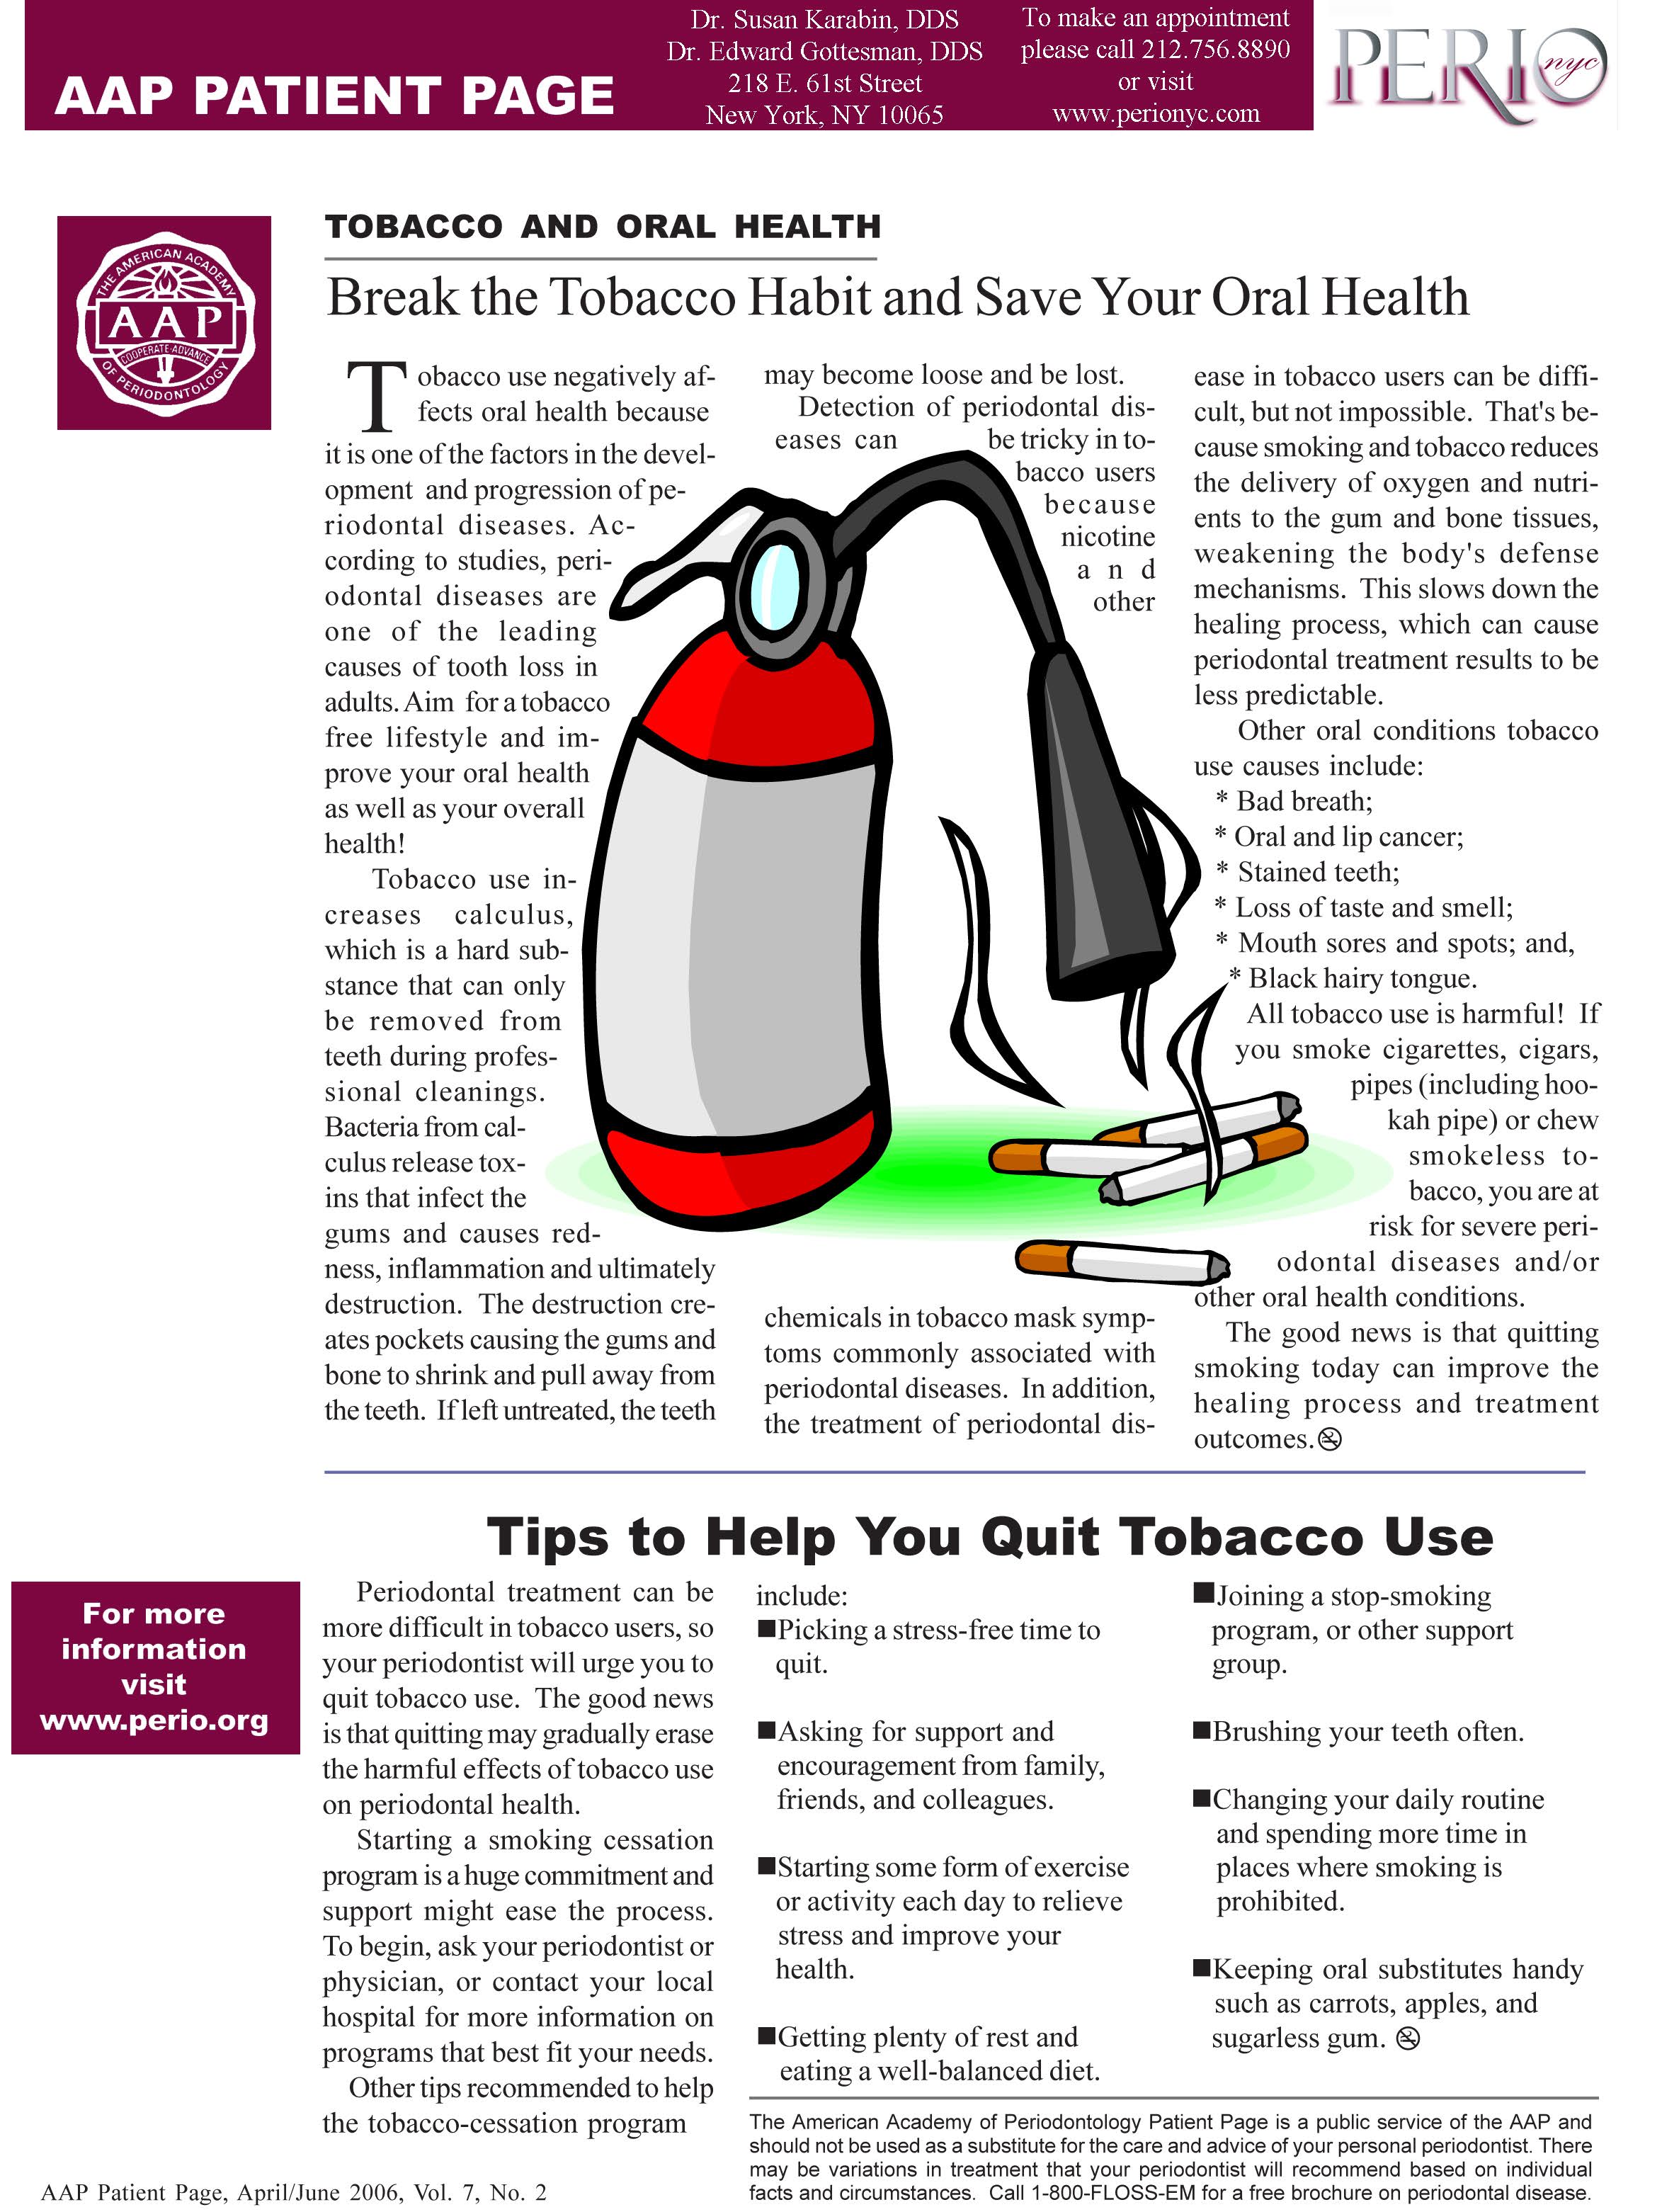 Oral Health and Tobacco